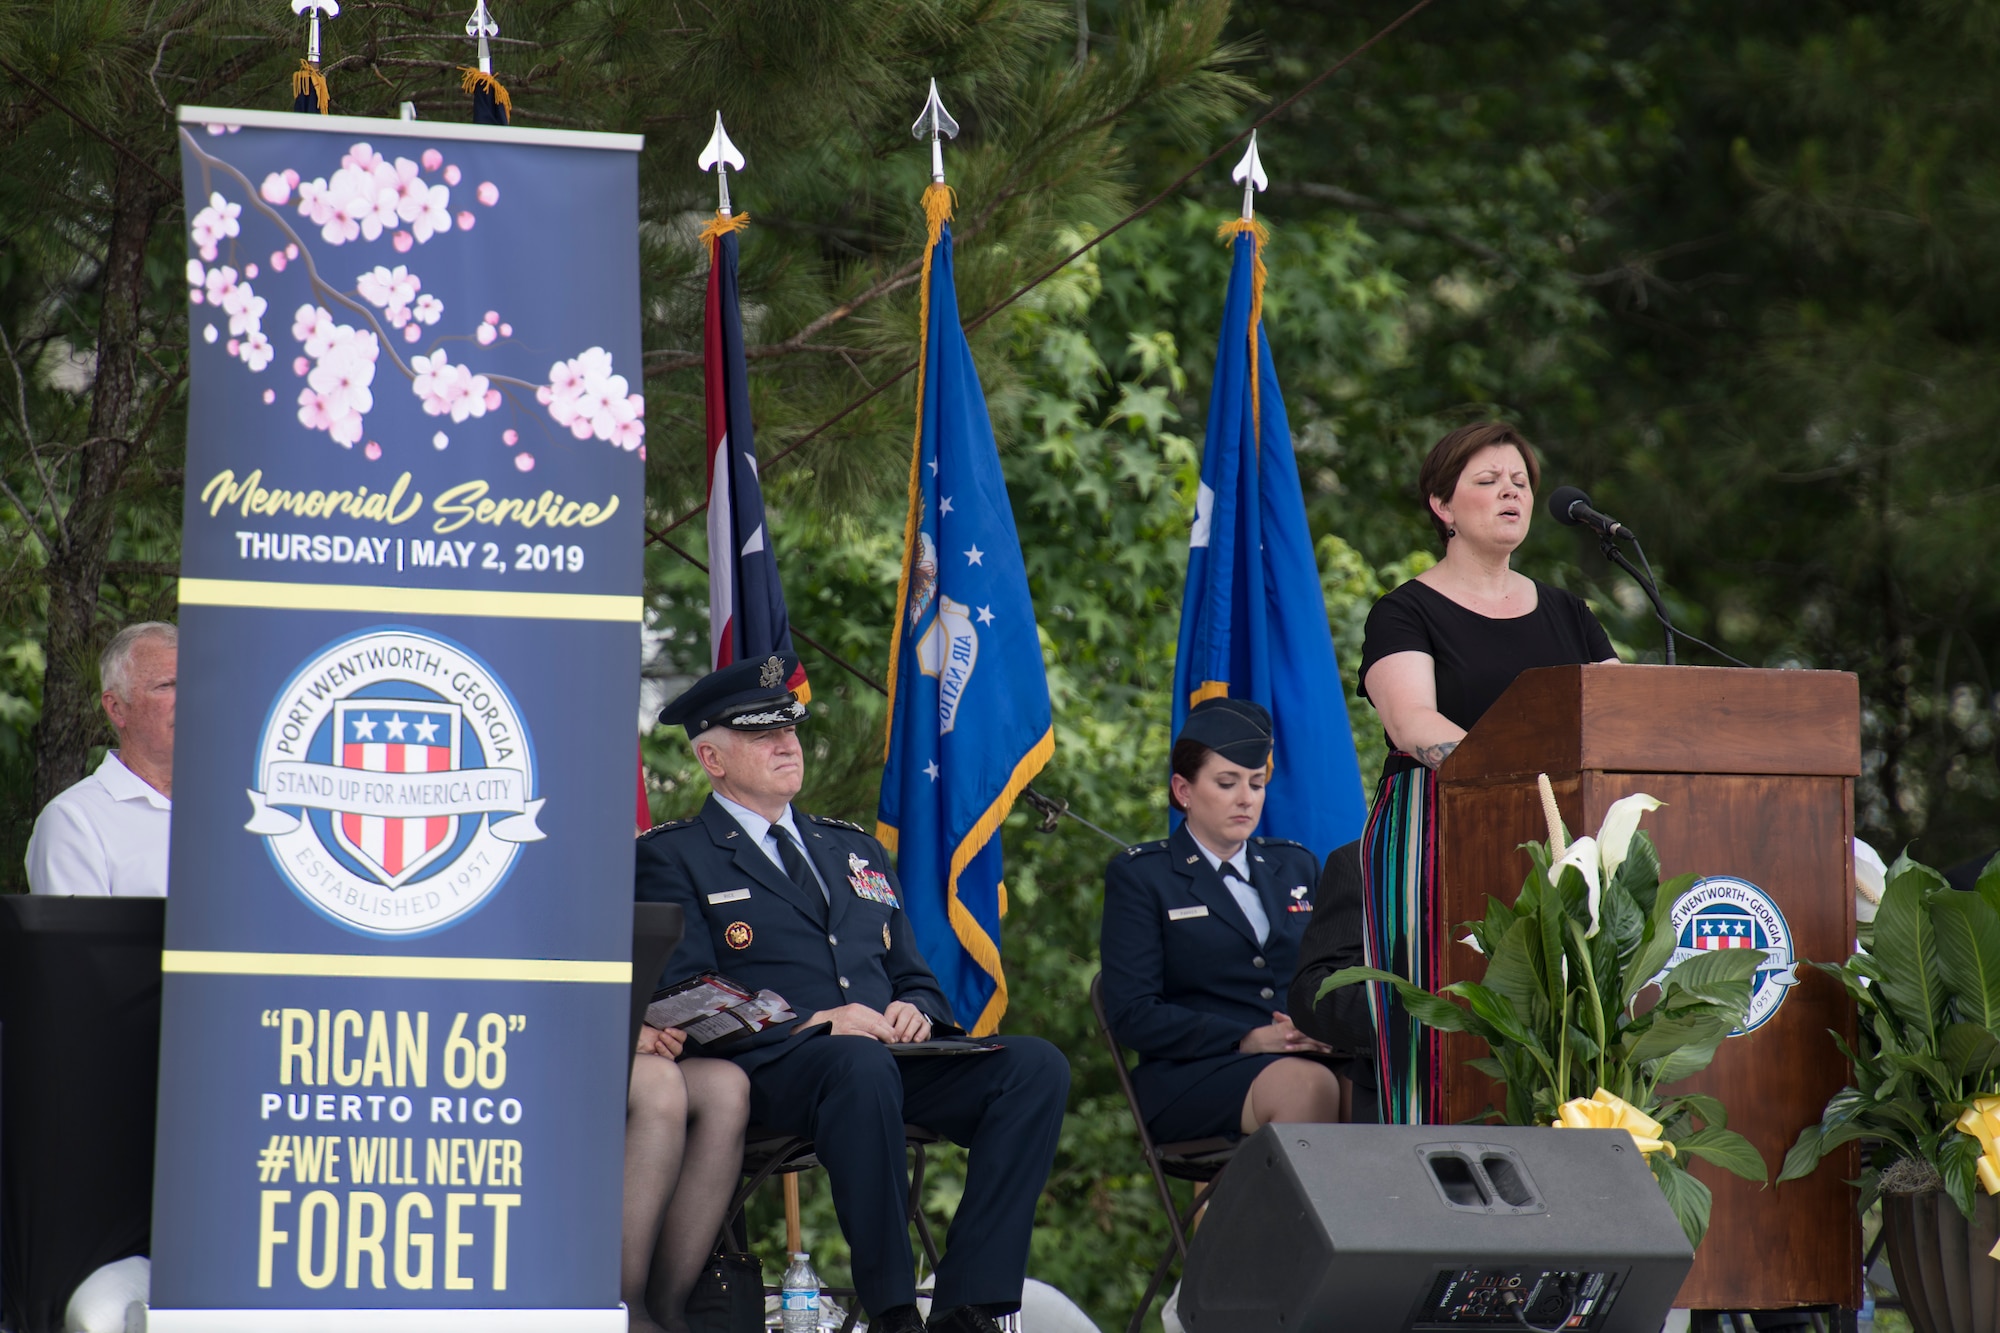 Amy Brackett sings “Amazing Grace” May 2, 2019, during a memorial service in Port Wentworth, GA, honoring the nine Airmen assigned to the 156th Airlift Wing who lost their lives in a C-130 Hercules crash May 2, 2018.